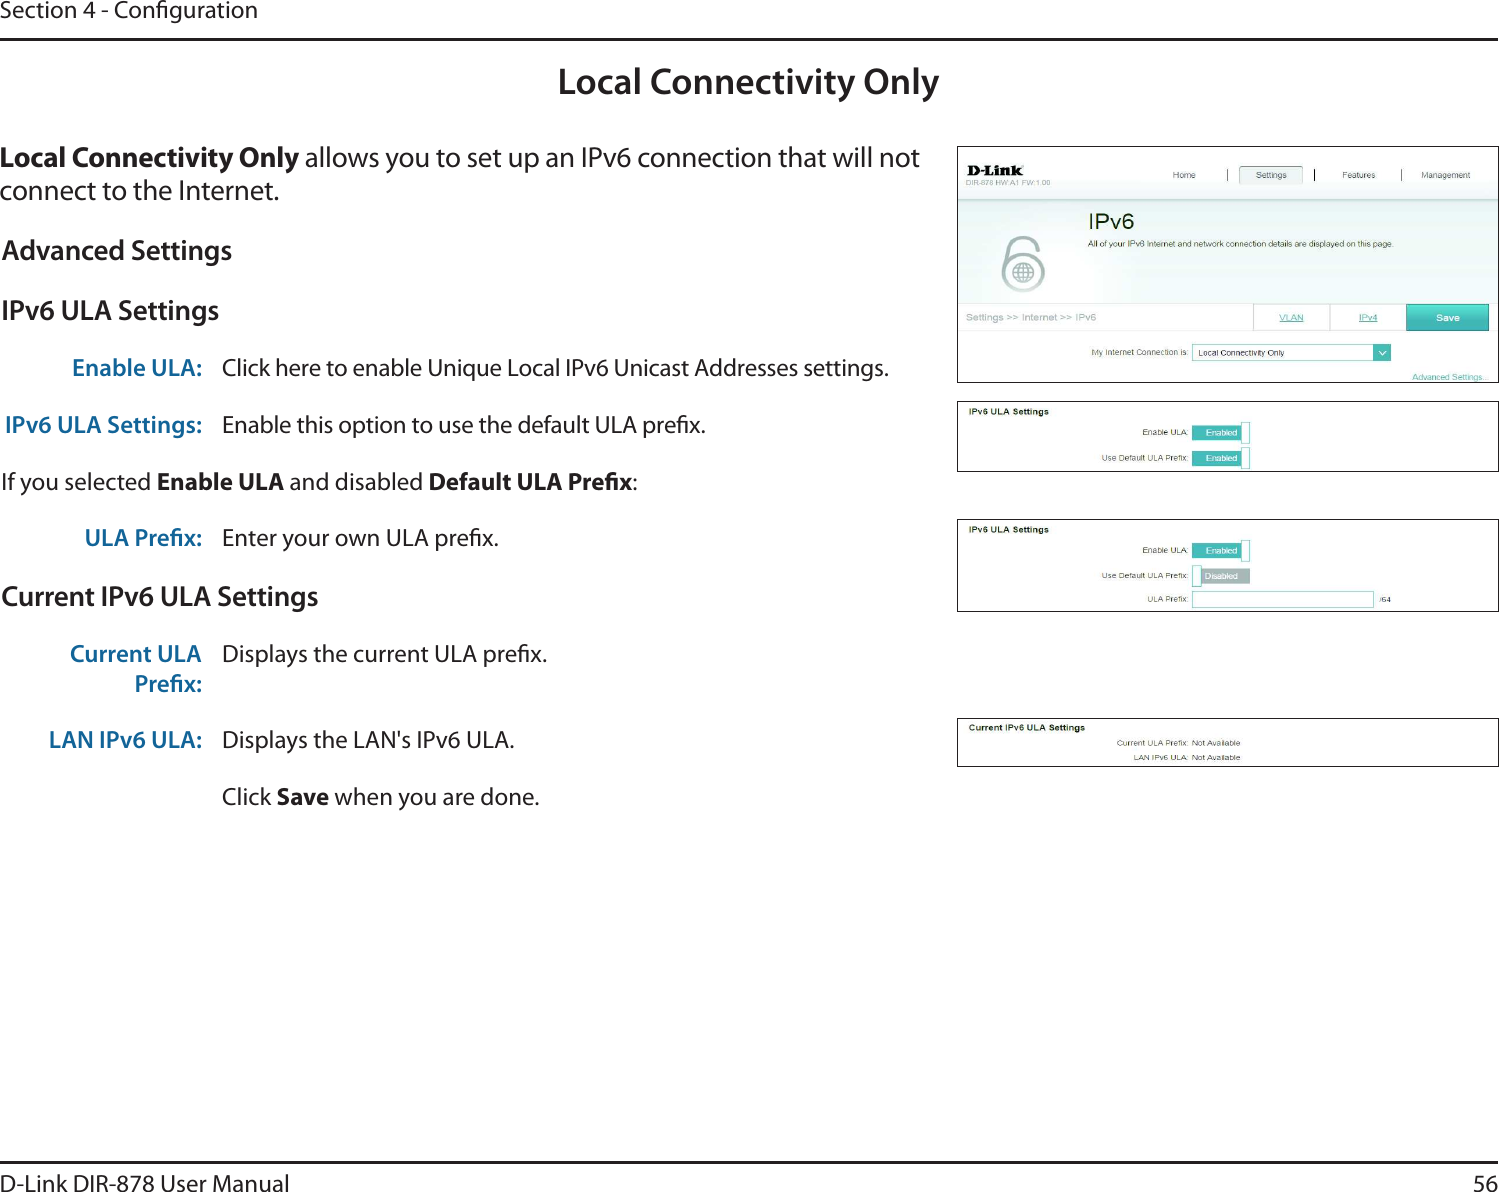 56D-Link DIR-878 User ManualSection 4 - CongurationLocal Connectivity Only-PDBM$POOFDUJWJUZ0OMZ allows you to set up an IPv6 connection that will not connect to the Internet.Advanced SettingsIPv6 ULA SettingsEnable ULA: Click here to enable Unique Local IPv6 Unicast Addresses settings.IPv6 ULA Settings: Enable this option to use the default ULA prex.If you selected &amp;OBCMF6-&quot; and disabled%FGBVMU6-&quot;1SFöY:ULA Prex: Enter your own ULA prex.Current IPv6 ULA SettingsCurrent ULA Prex:Displays the current ULA prex. LAN IPv6 ULA: Displays the LAN&apos;s IPv6 ULA.Click Save when you are done.